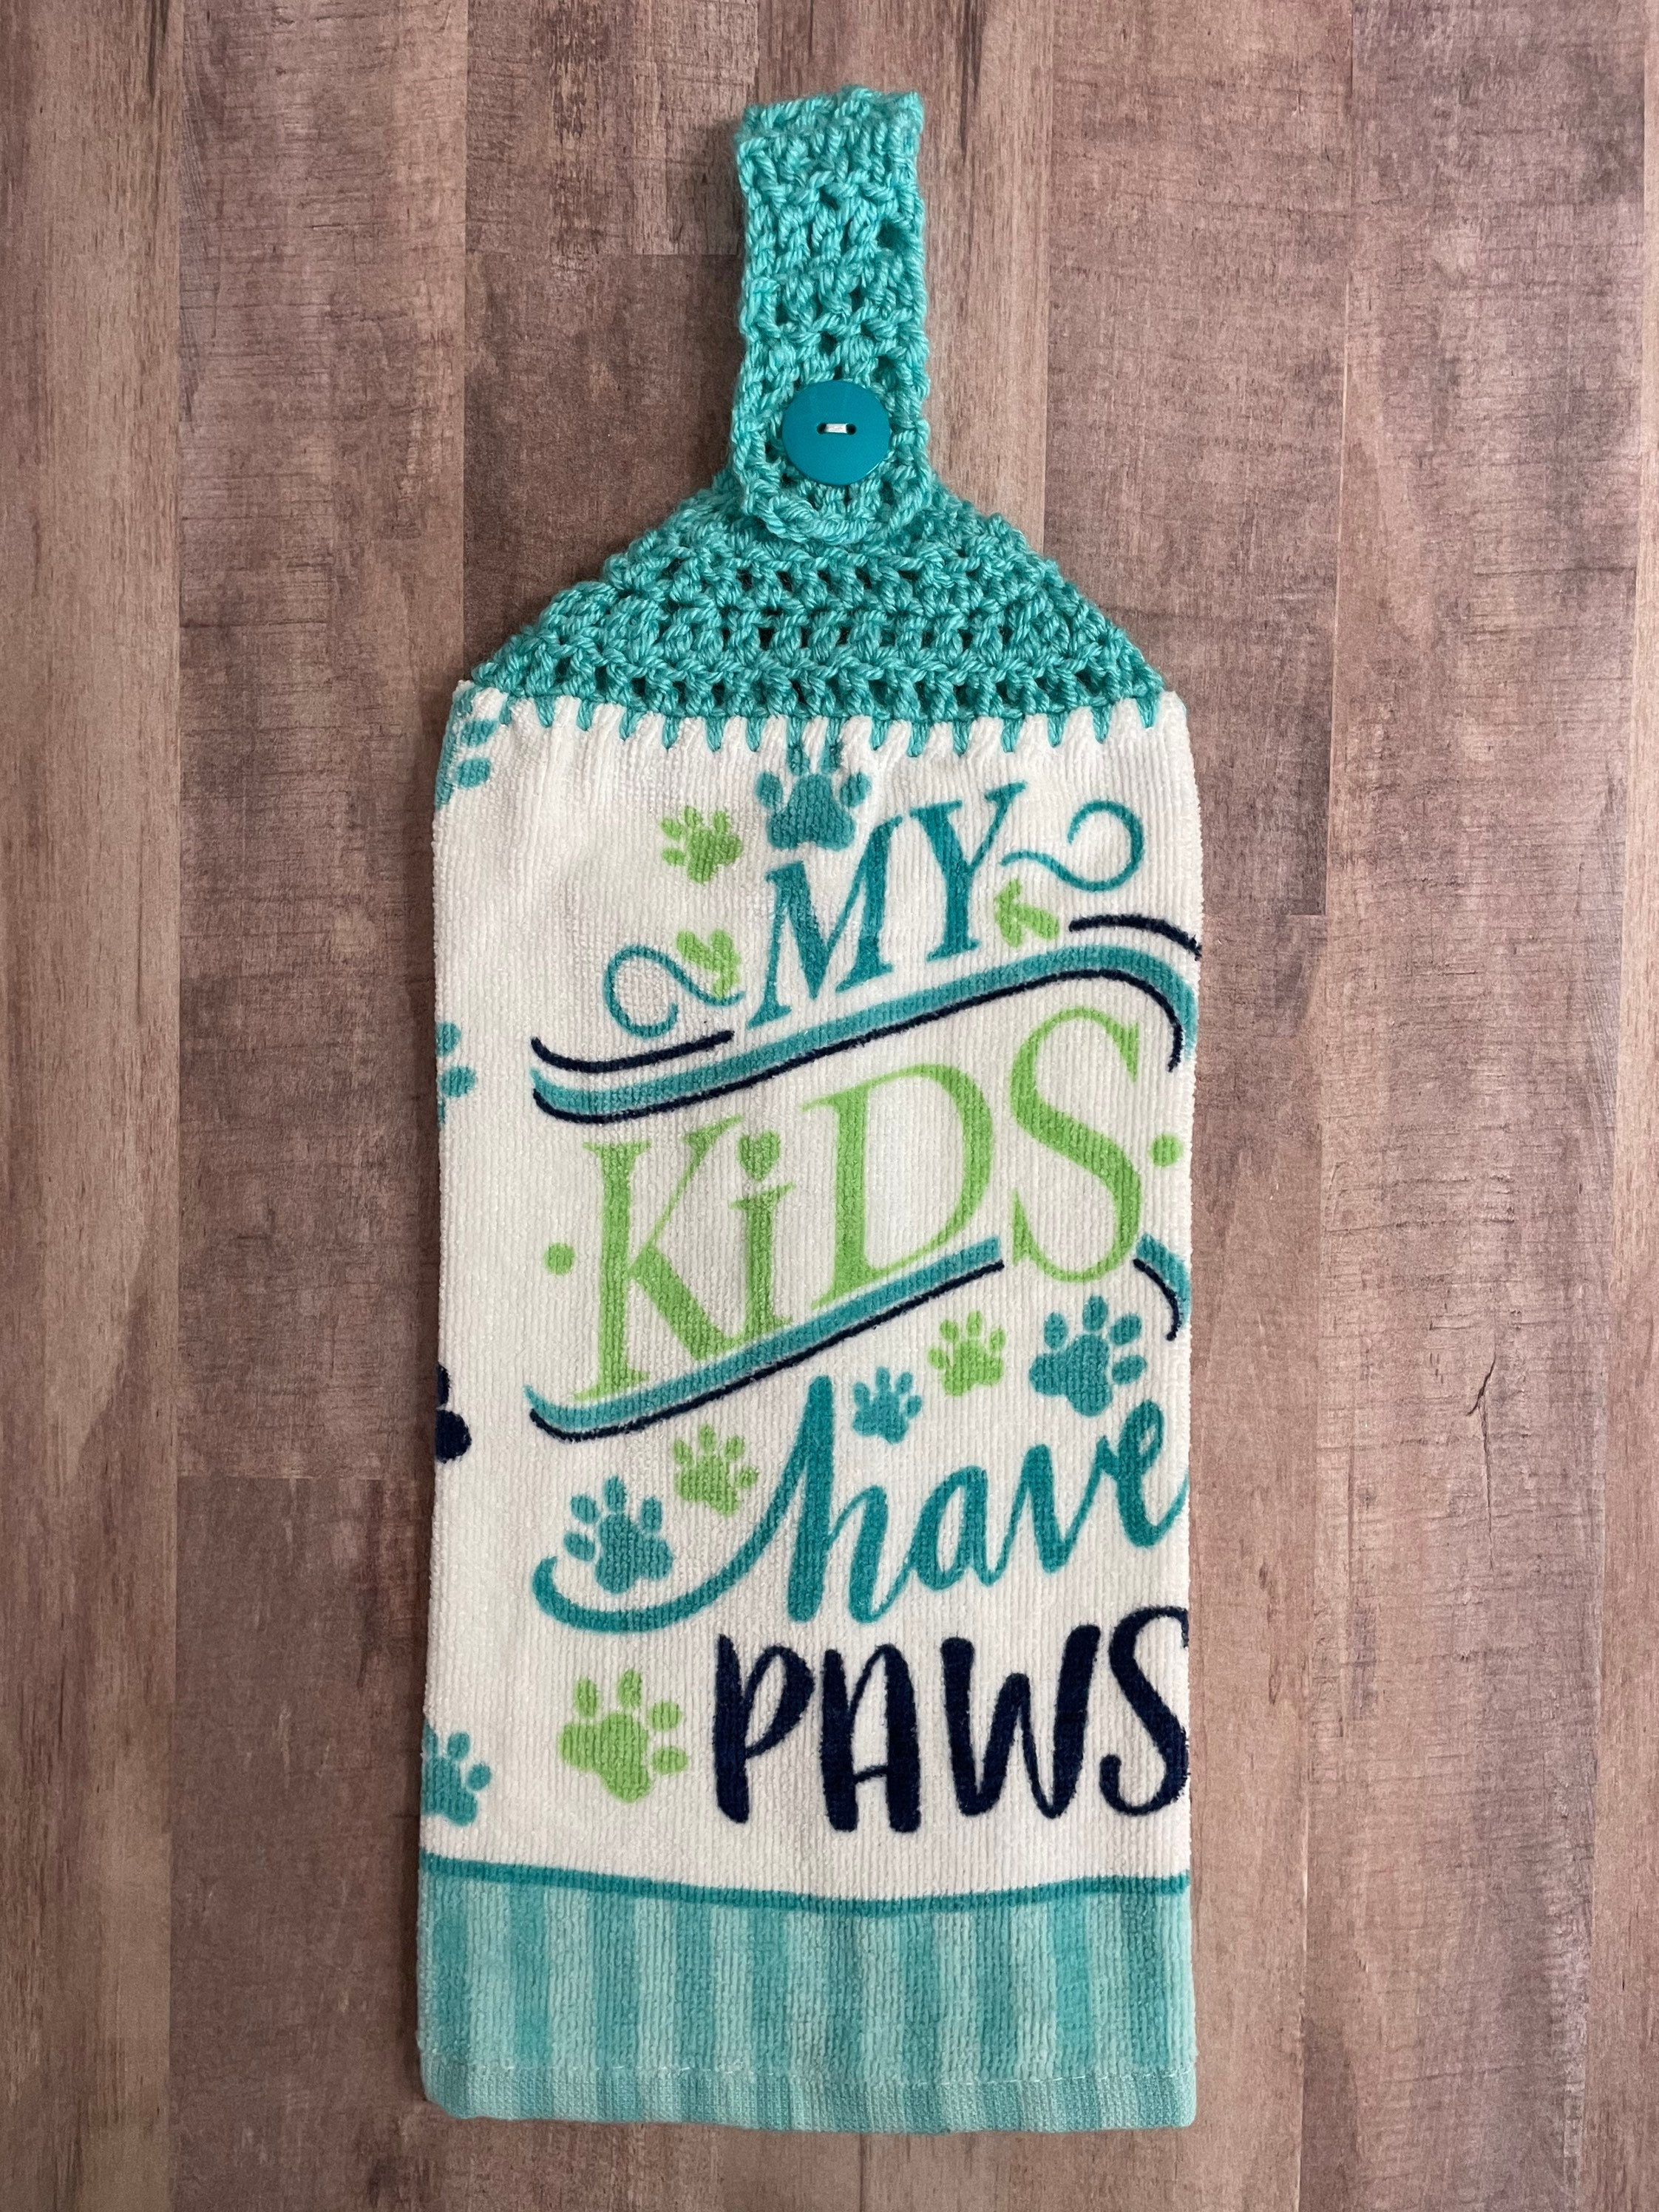 My Kids Have Paws Crocheted Top Dish Towel